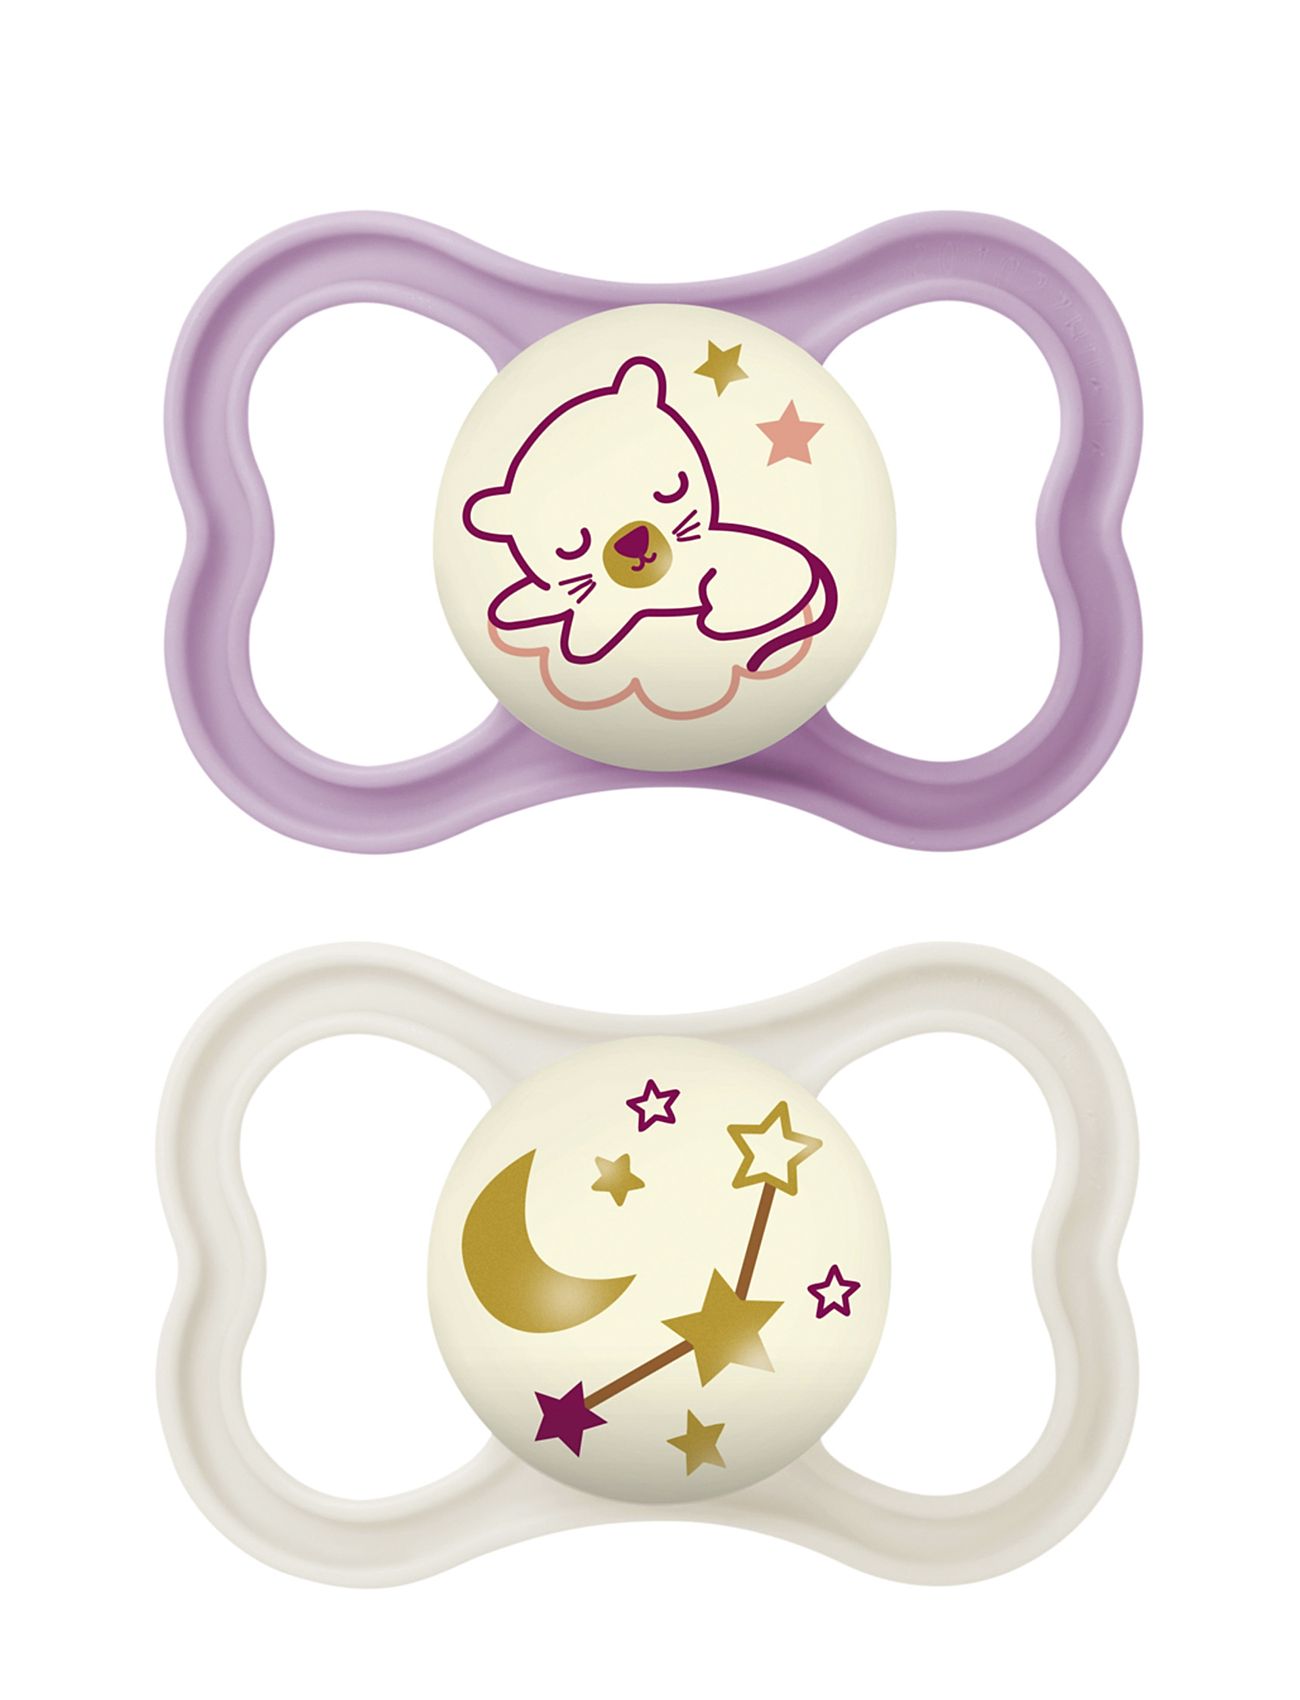 Mam Air Night Pink 16-36M Baby & Maternity Pacifiers & Accessories Pacifiers Multi/patterned MAM